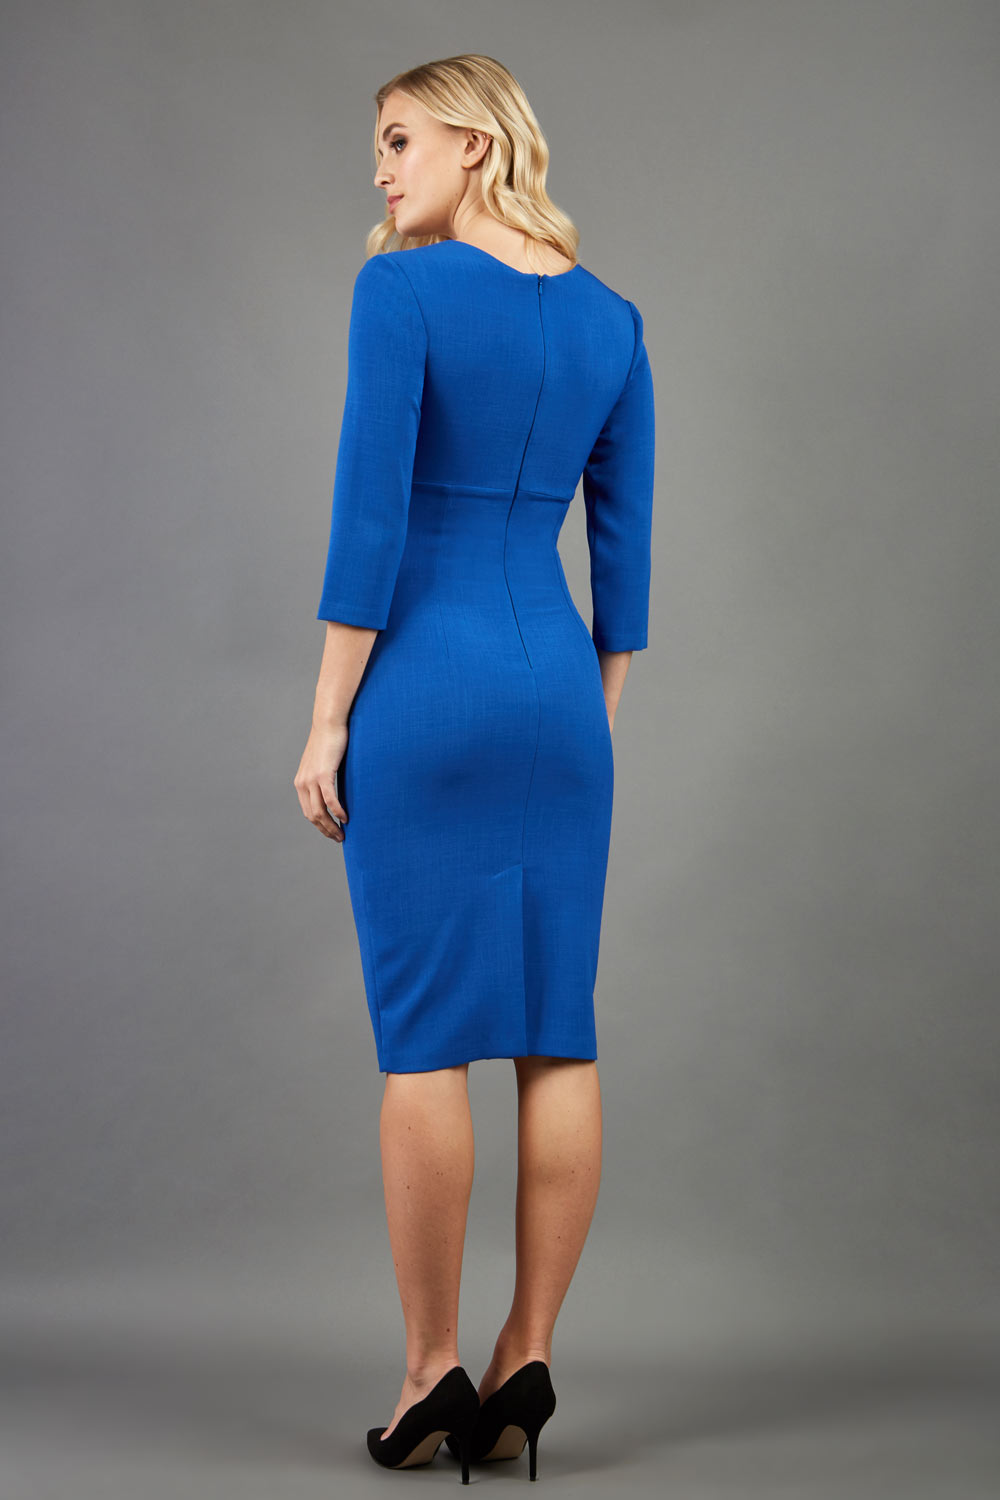 blond model wearing diva catwalk nashville plain pencil skirt dress with sleeves and square neckline and Empire waistline in royal blue colour back